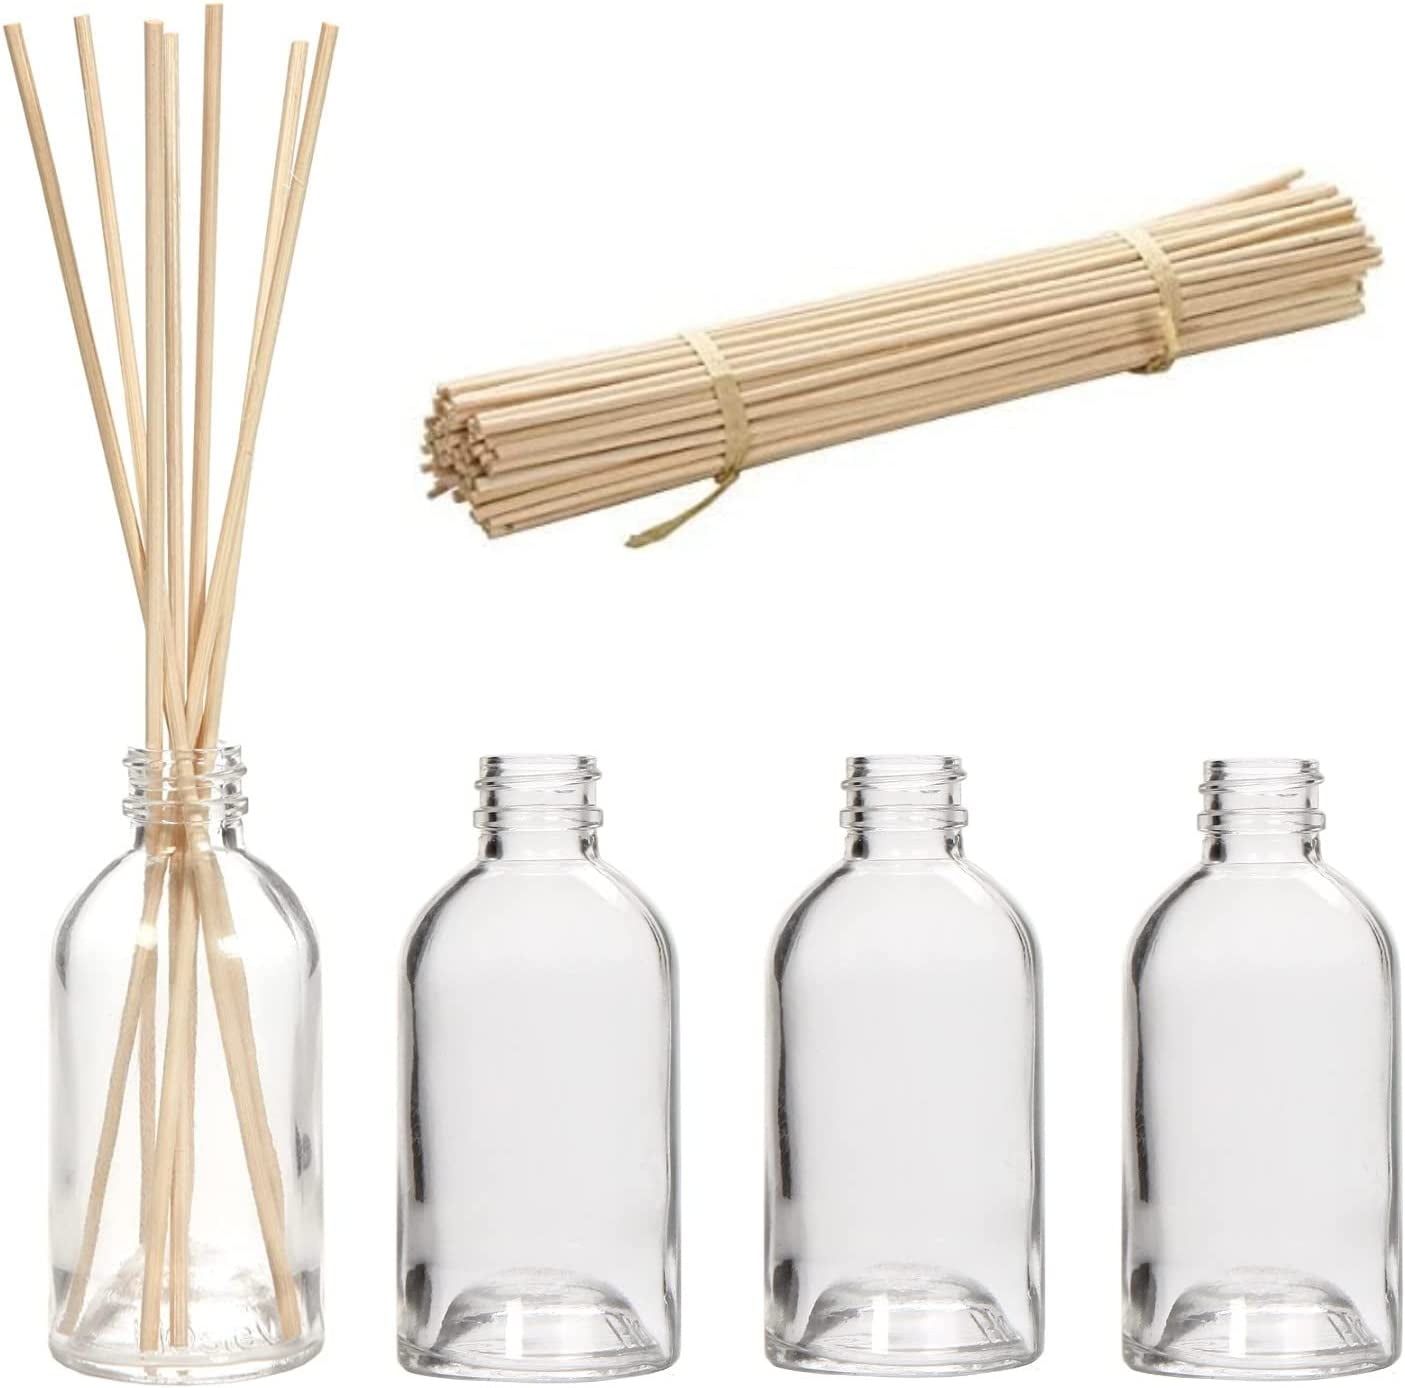 Hosley Set of 4 Diffuser Boston Round Style Glass Diffuser Bottles 85  Milliliter with Bulk Pack of 108 Rattan Diffuser Reeds 7 High, Diffusers  Craft